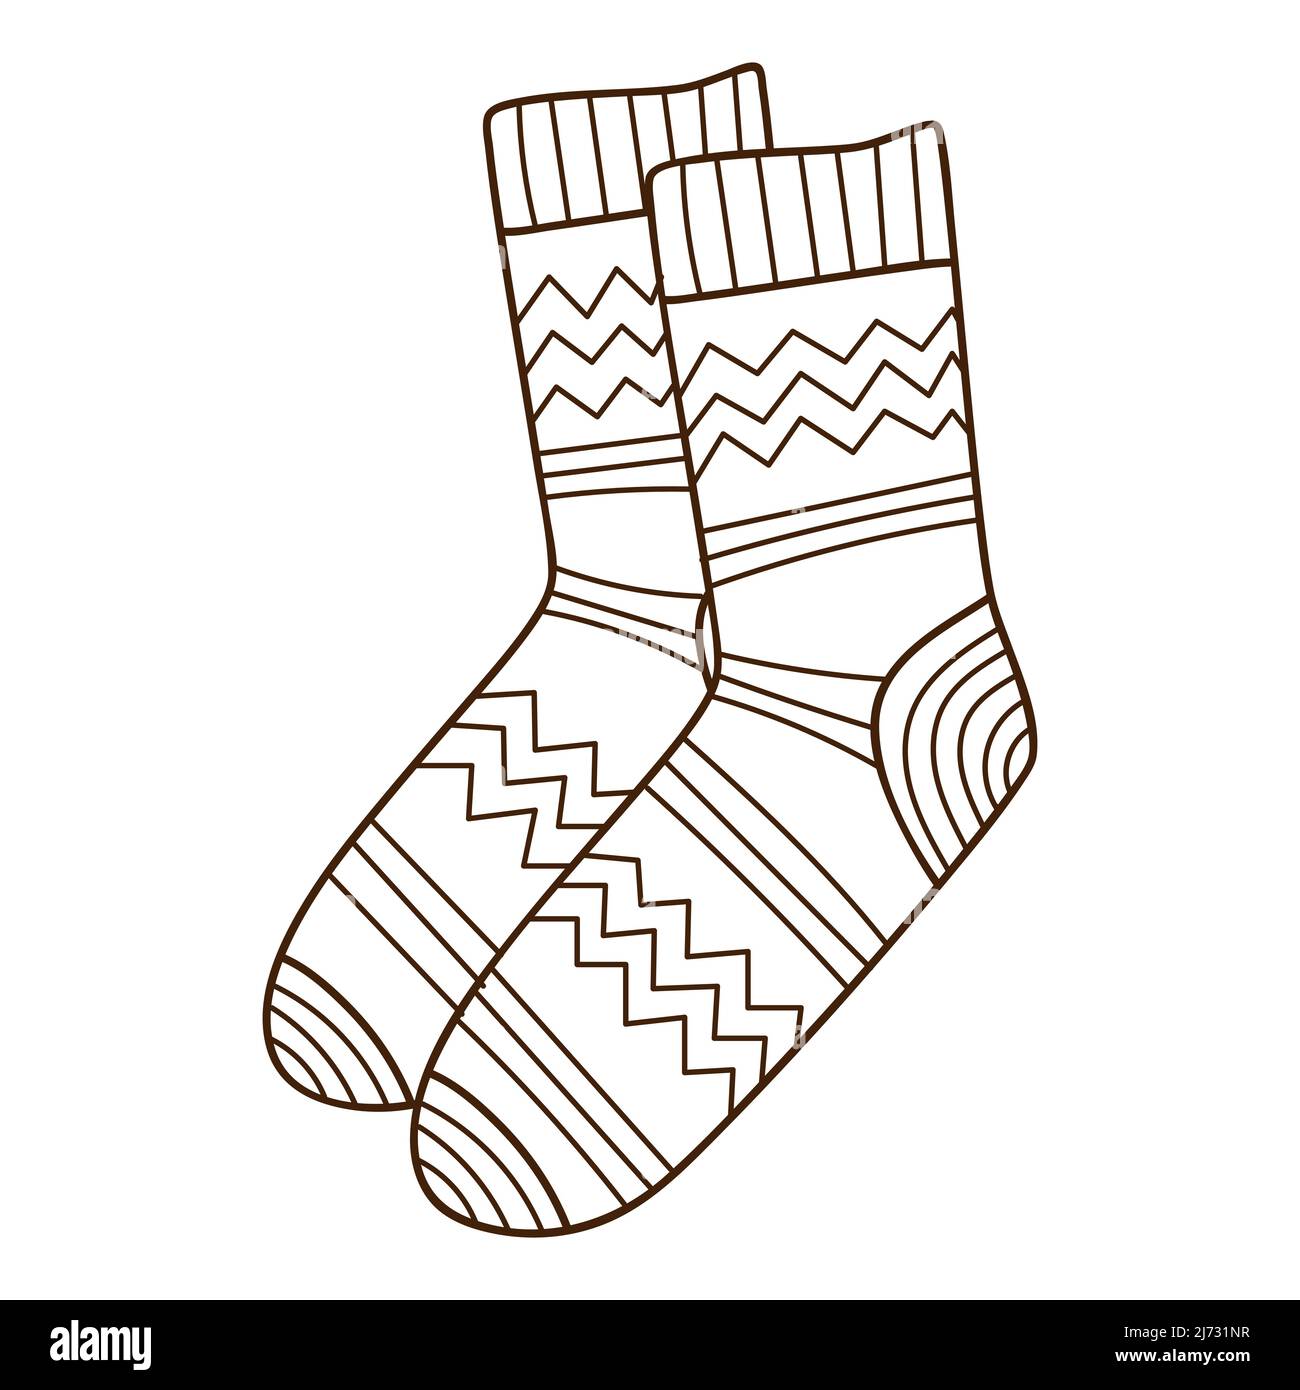 A pair of warm patterned socks. Autumn and winter clothing. Design element with outline. The theme of winter, autumn. Doodle, hand-drawn. Black white Stock Vector